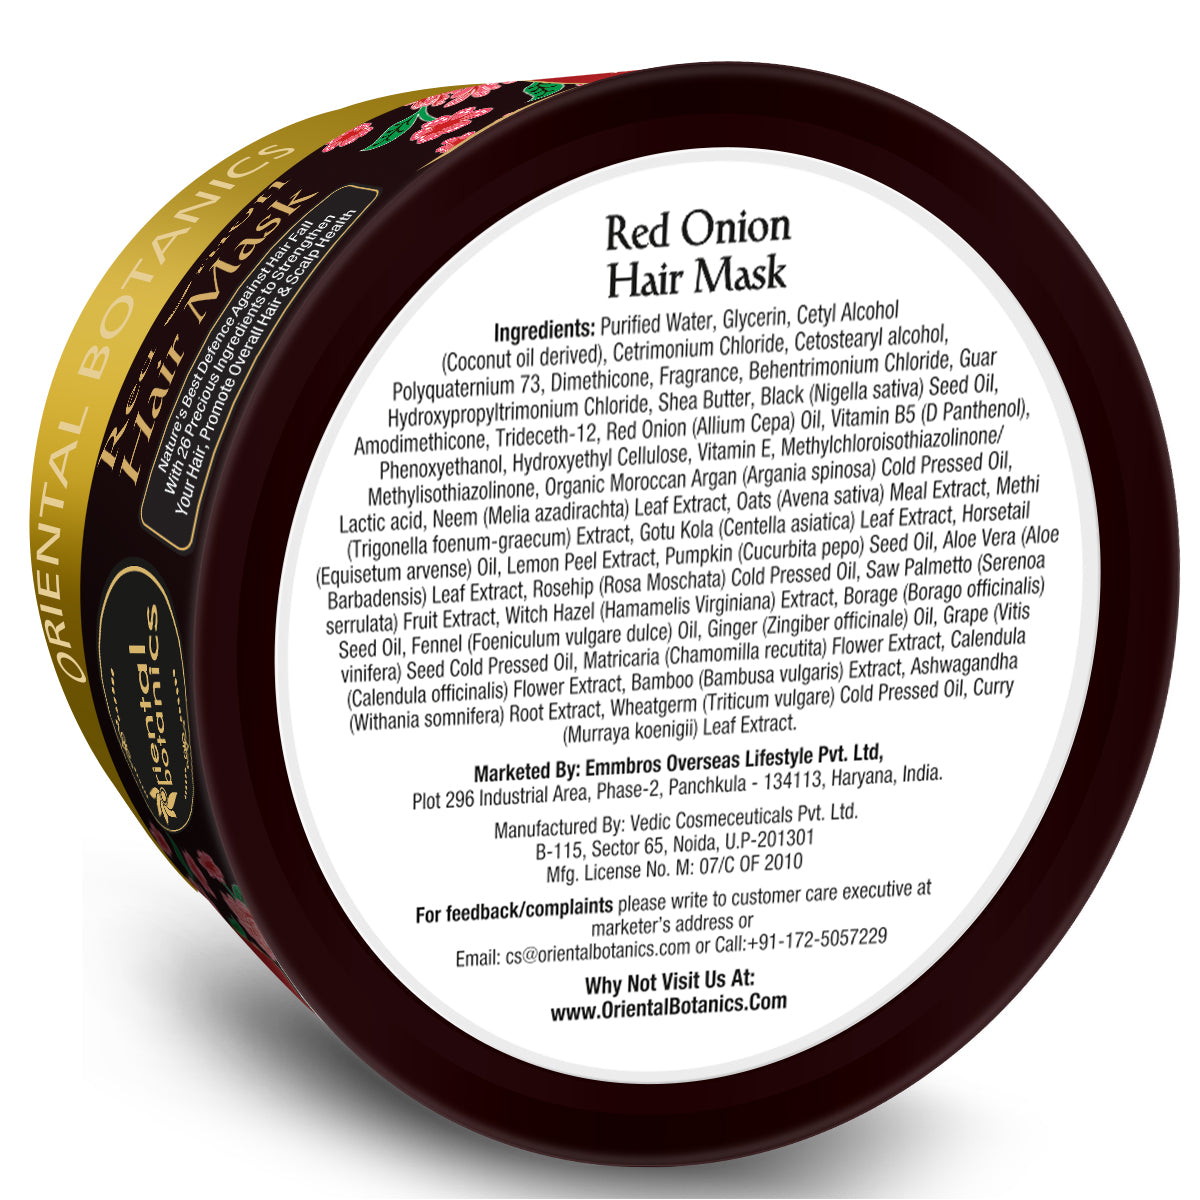 Oriental Botanics Red Onion Hair Mask With Red Onion Oil & 26 Botanical Actives, 200 ml (ORBOT46)